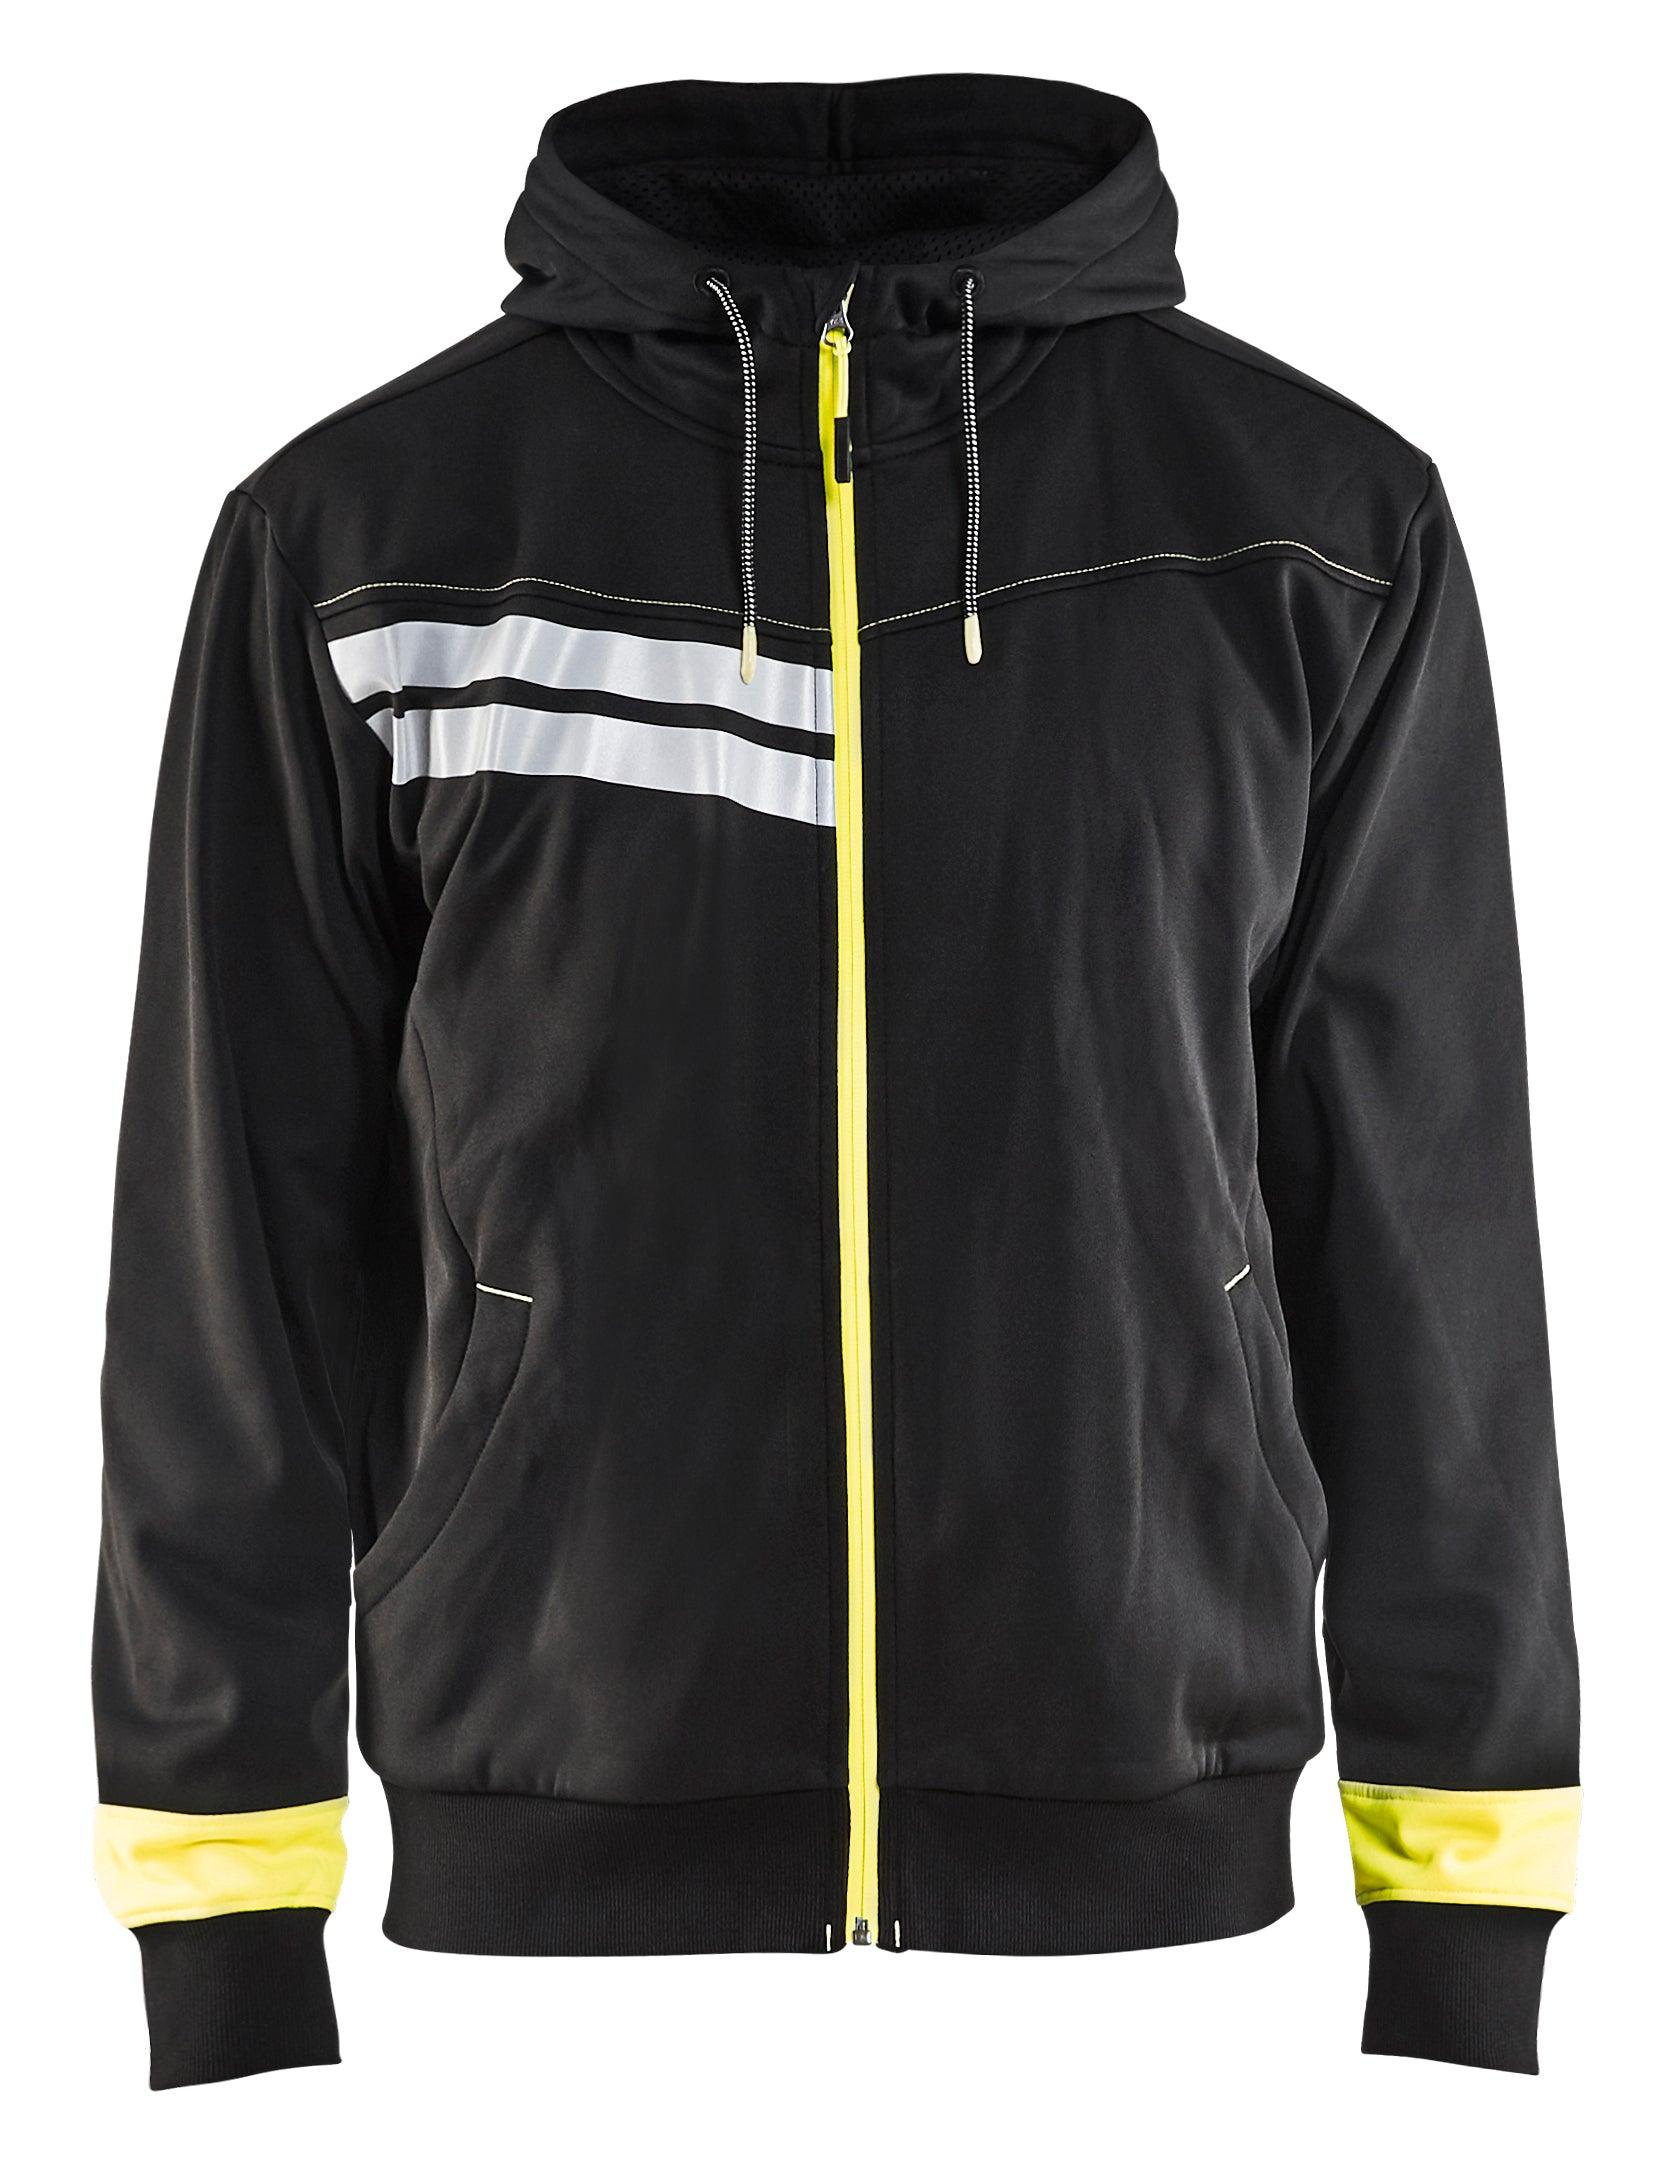 Blaklader 4958 Visibility Hoodie with Reflective Details - Black/Yellow Hi-Vis - Trusted Gear Company LLC